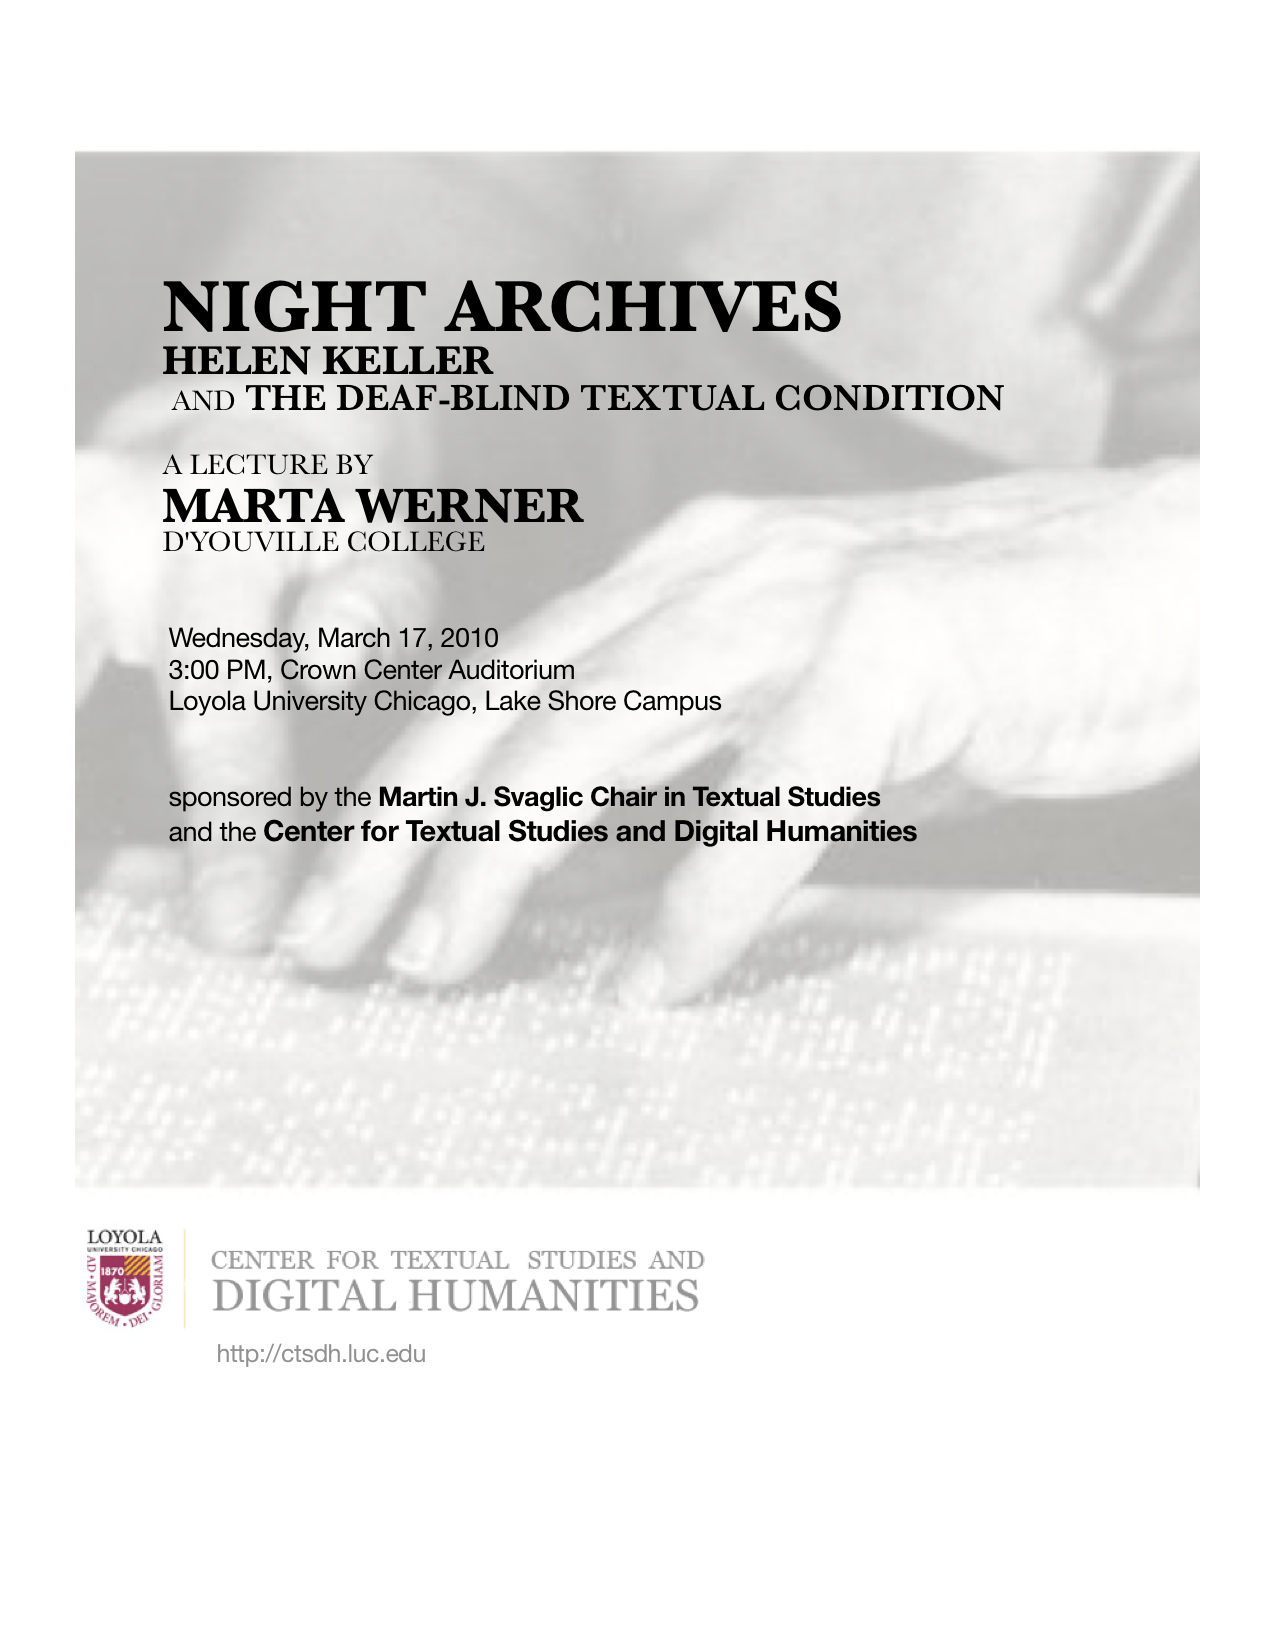 Night Archives: Helen Keller and the Deaf-Blind Textual Condition - Martha Werner (D’Youville College), March 17, 2010